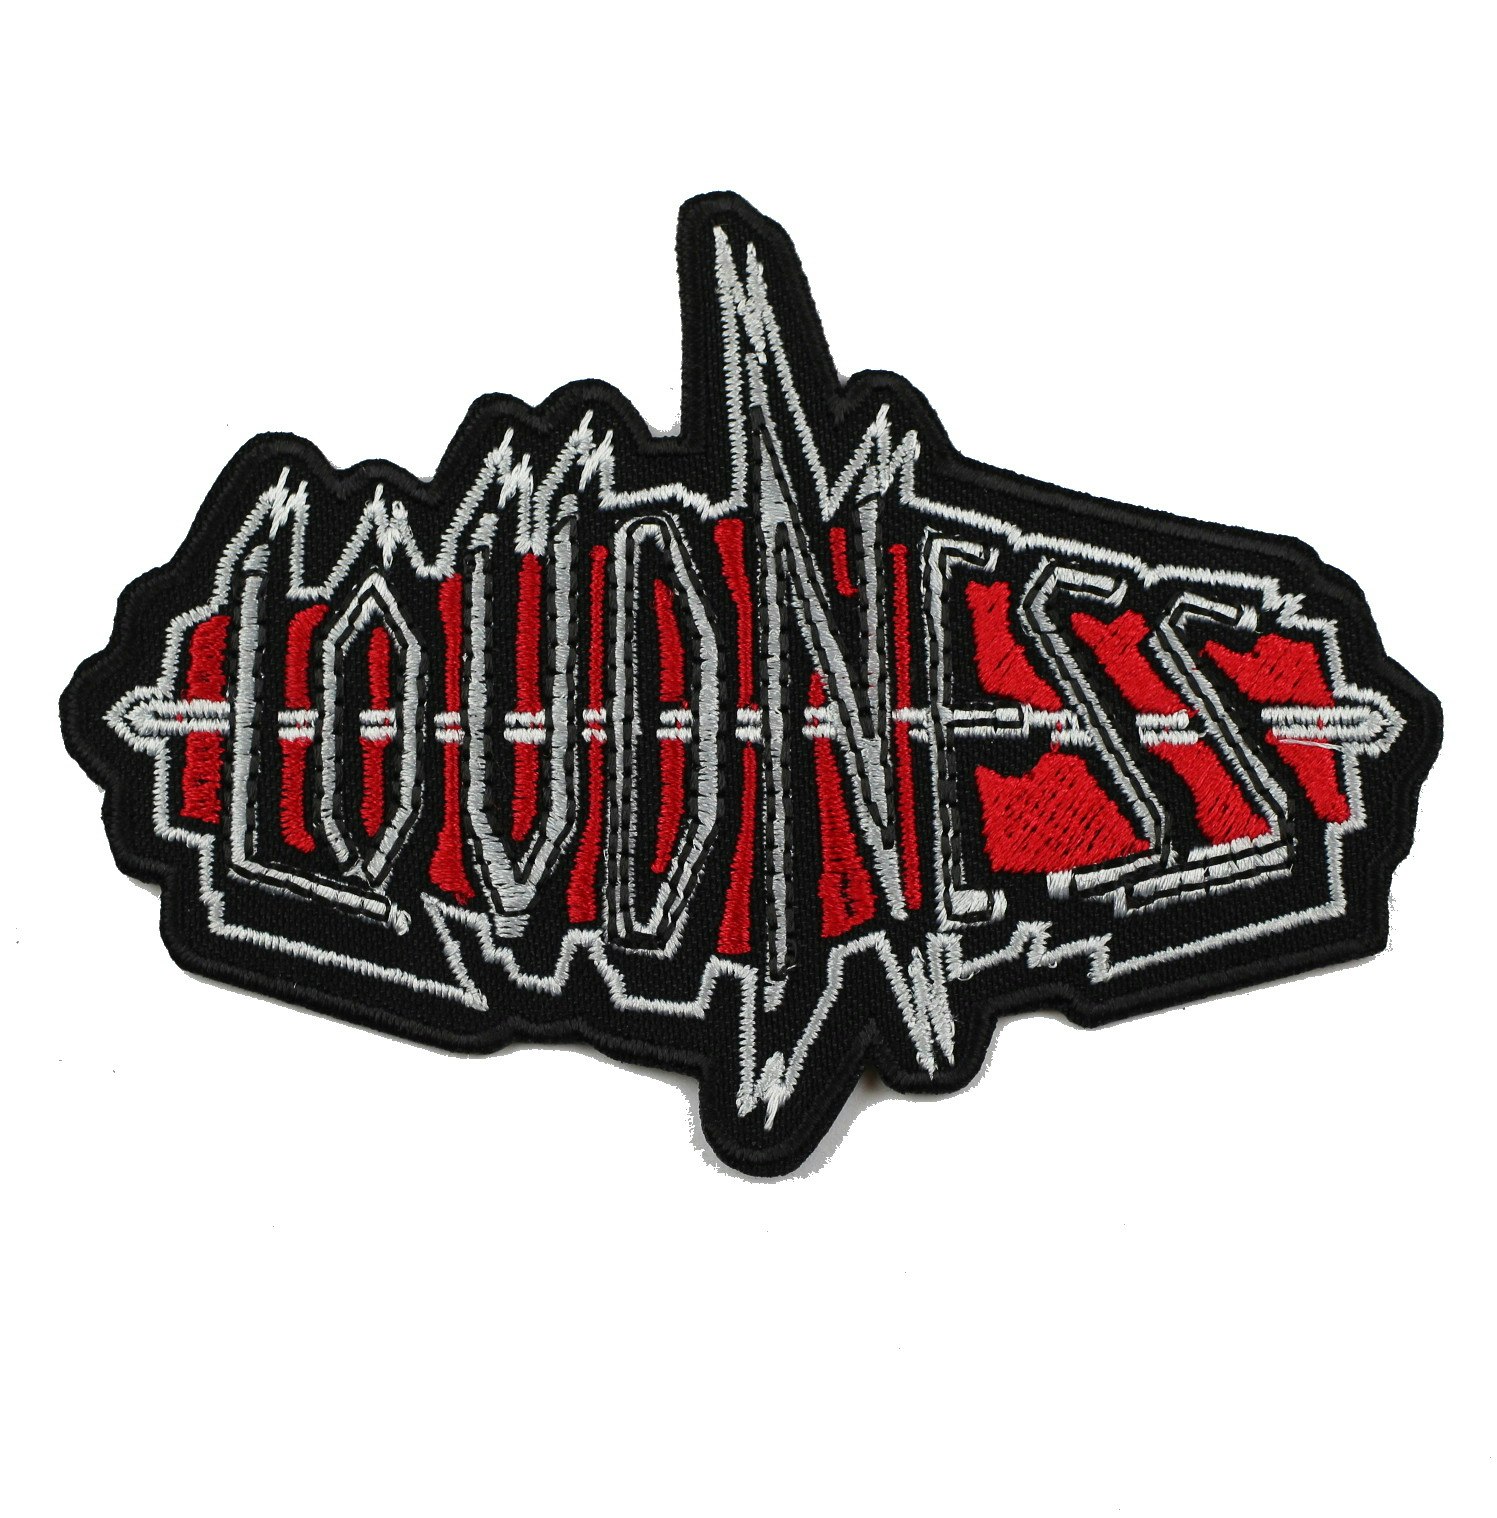 Loudness logo patch